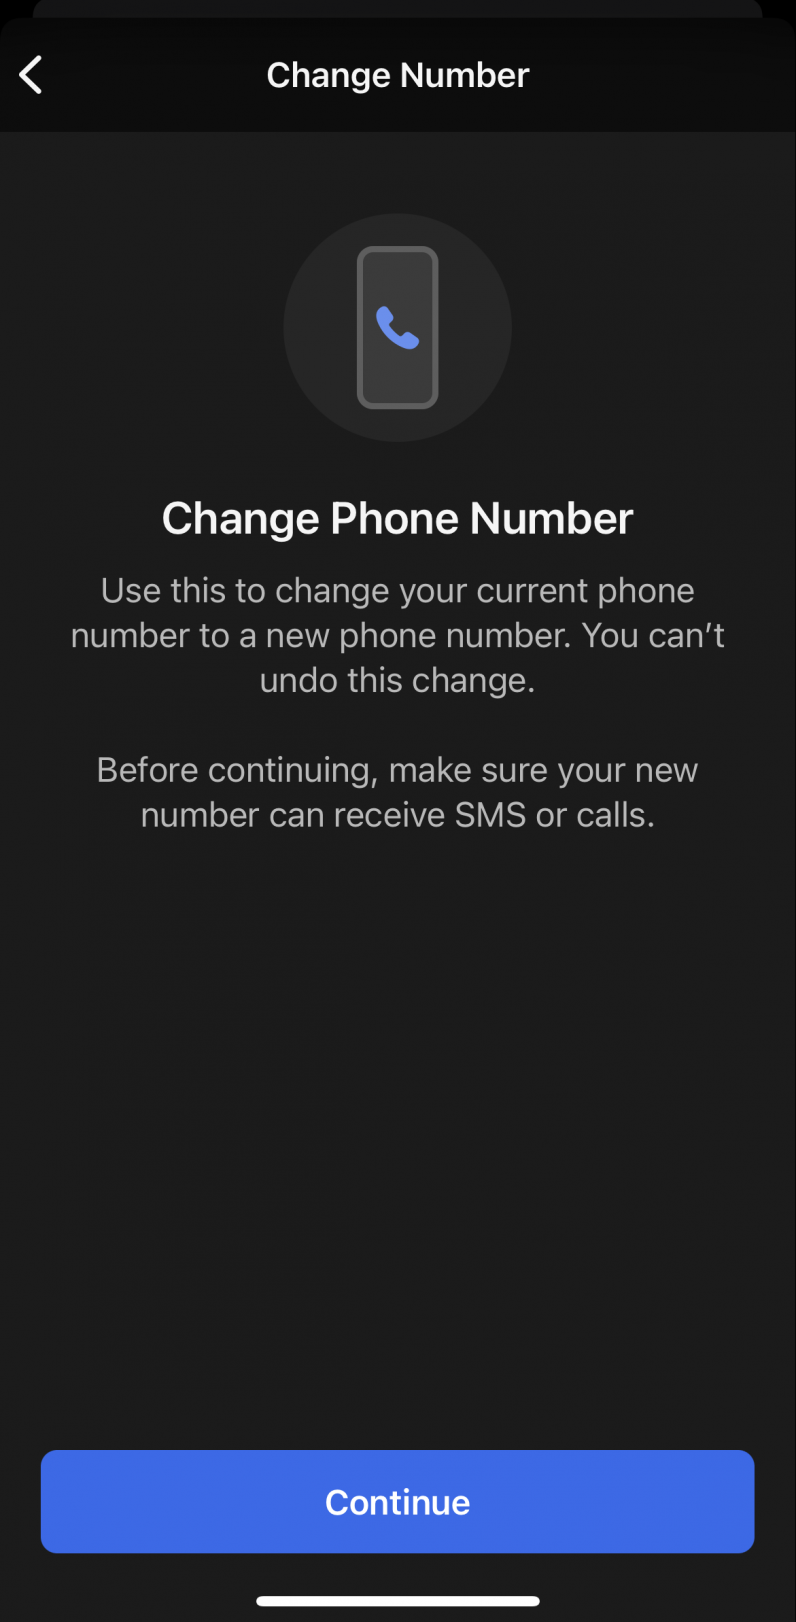 Change phone number feature lets you switch numbers without losing chat history.